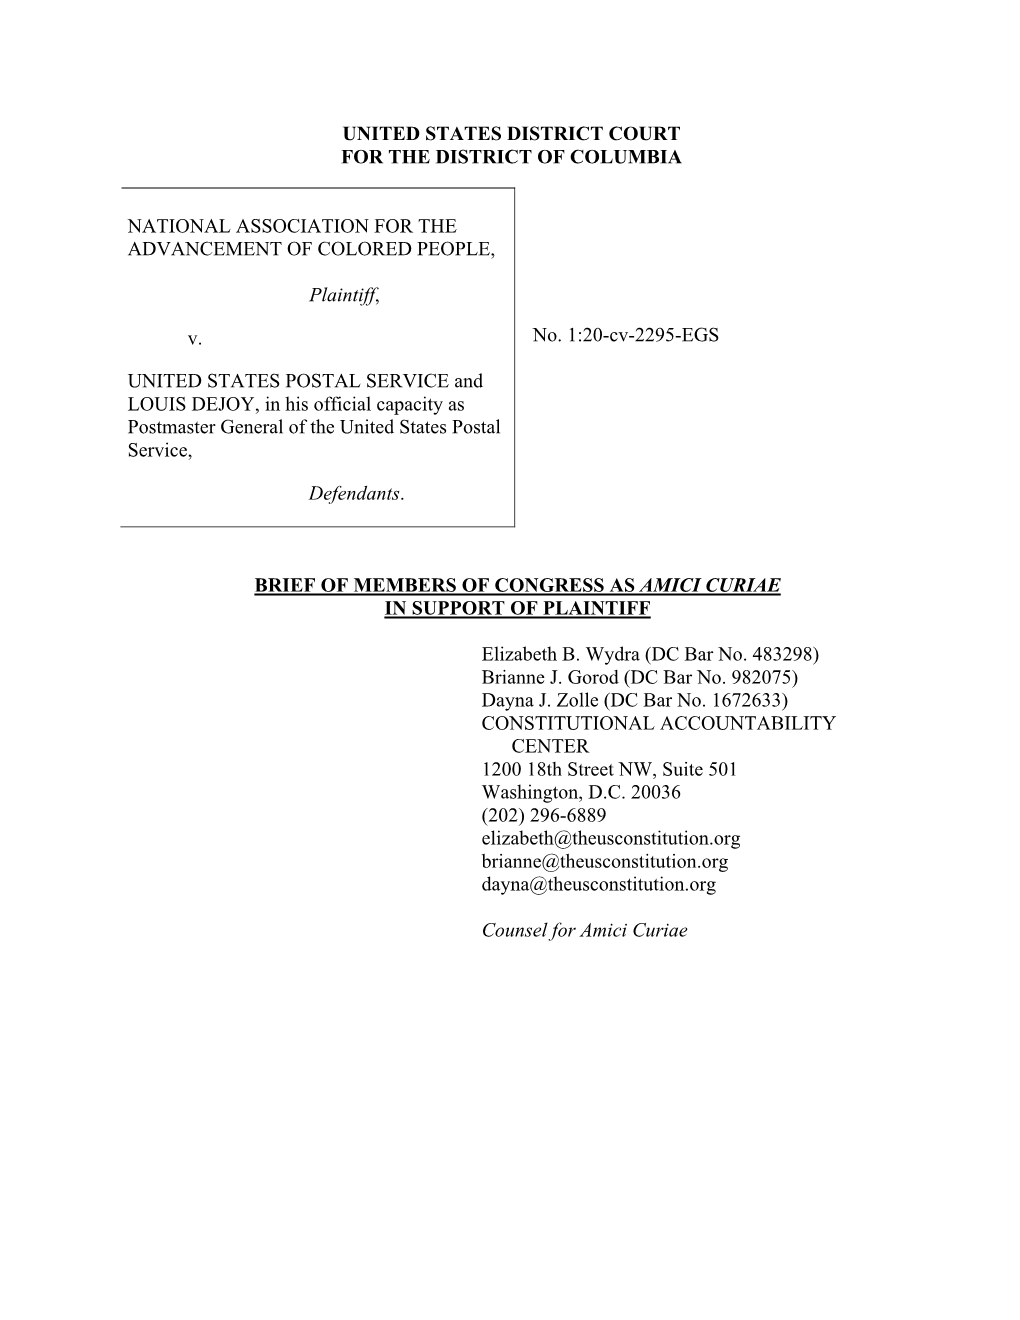 NAACP V. USPS Amicus Brief FINAL